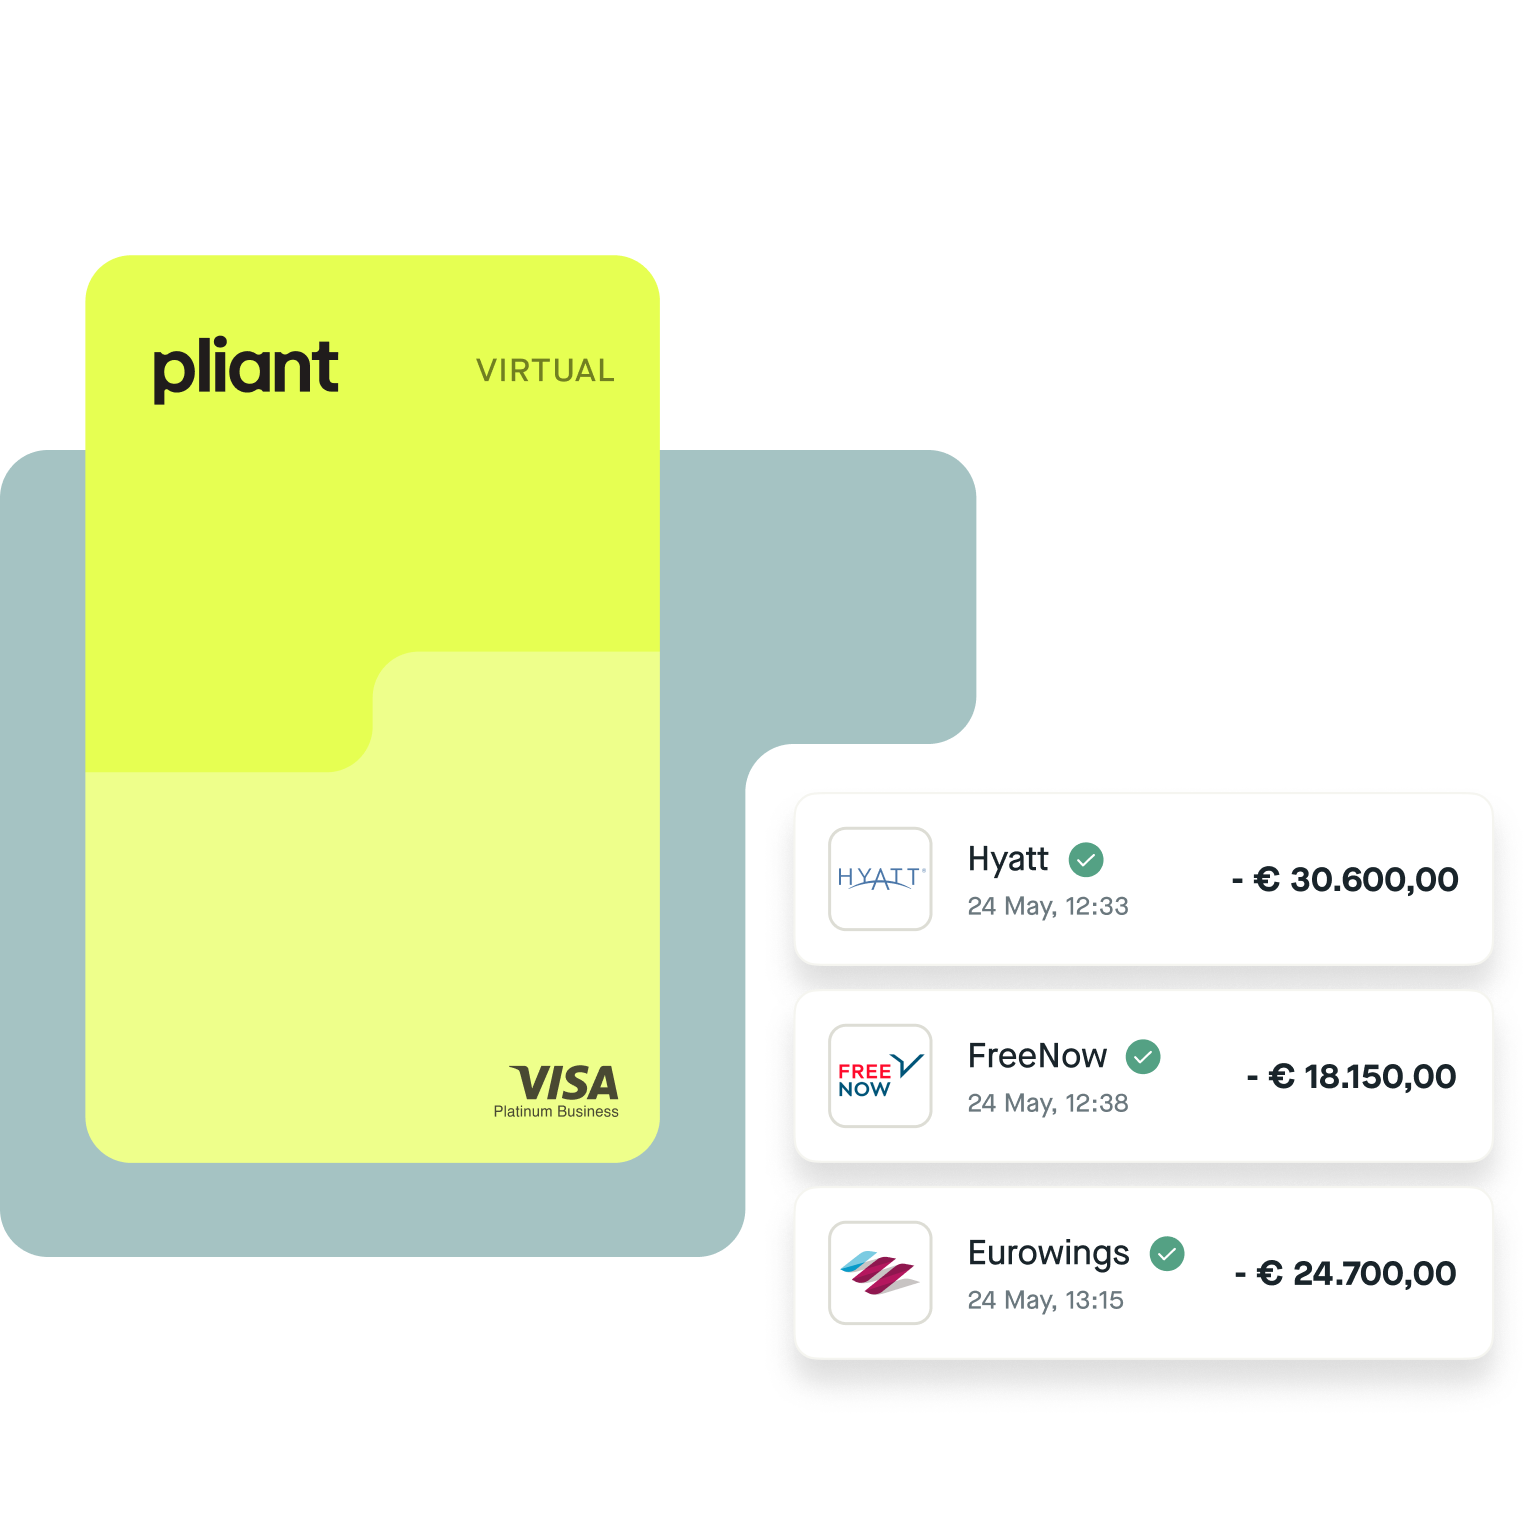 Pliant's fully automated travel purchasing virtual credit card